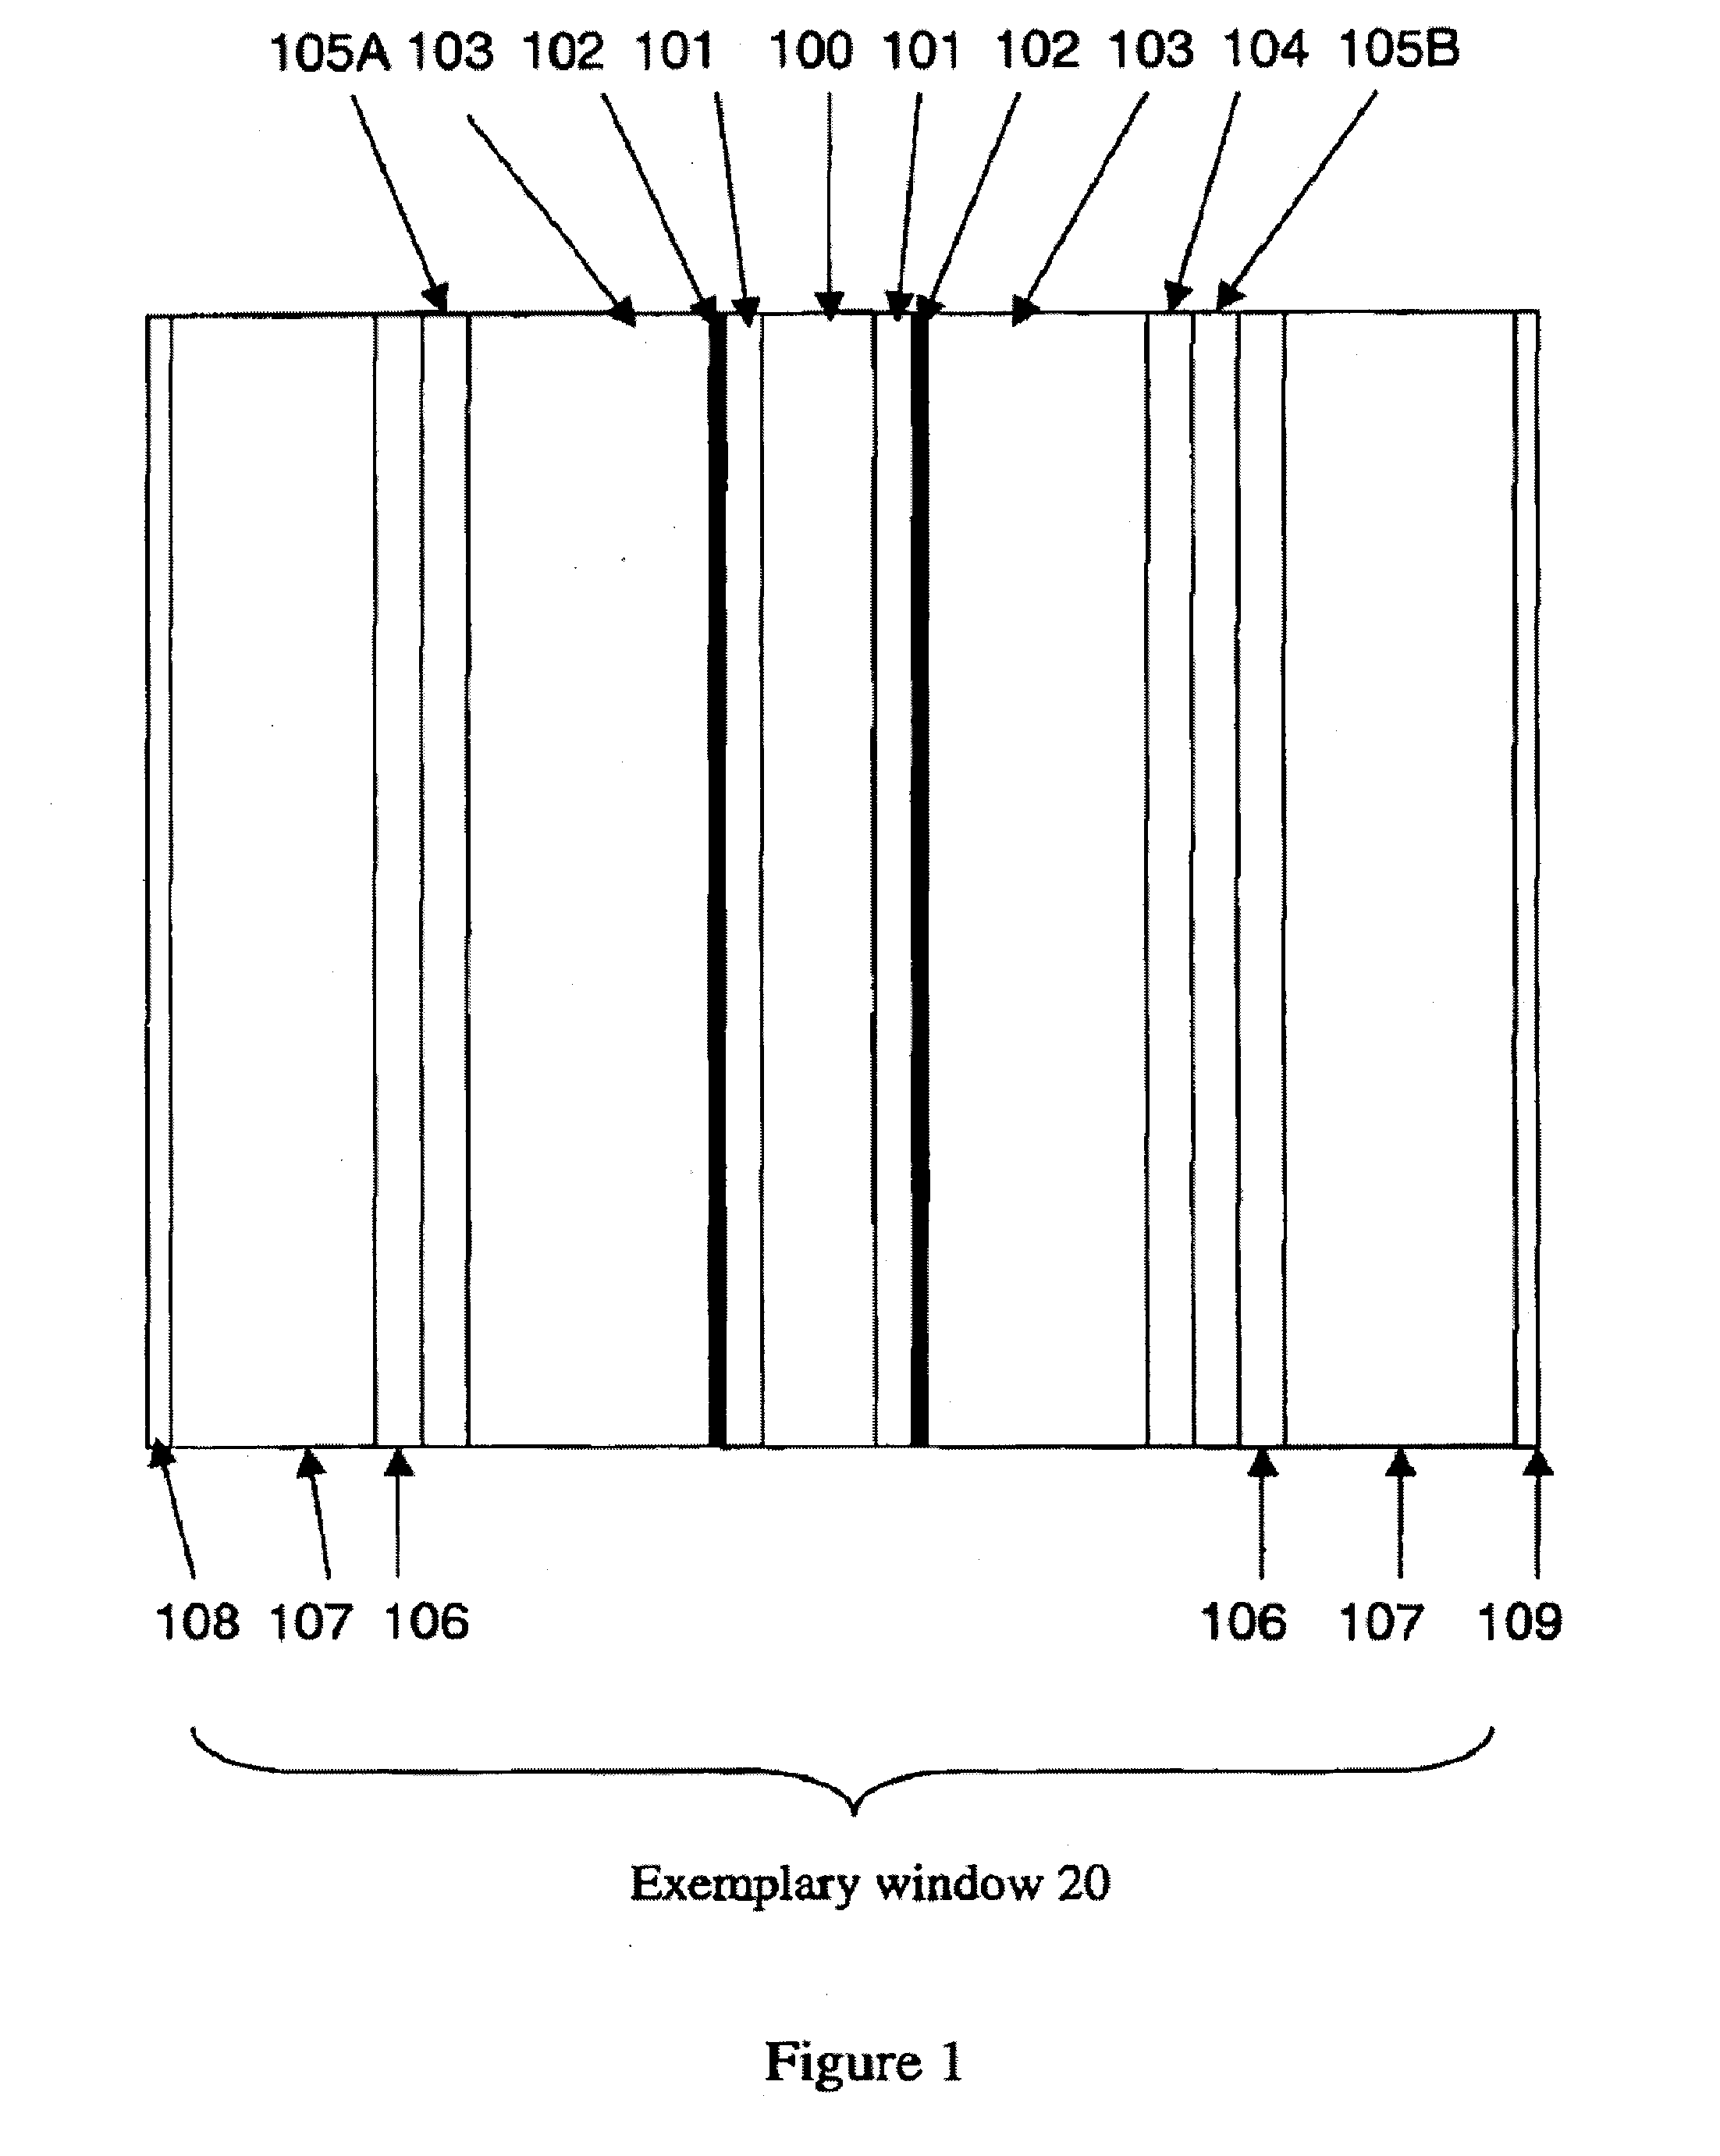 Windows with electrically controllable transmission and reflection